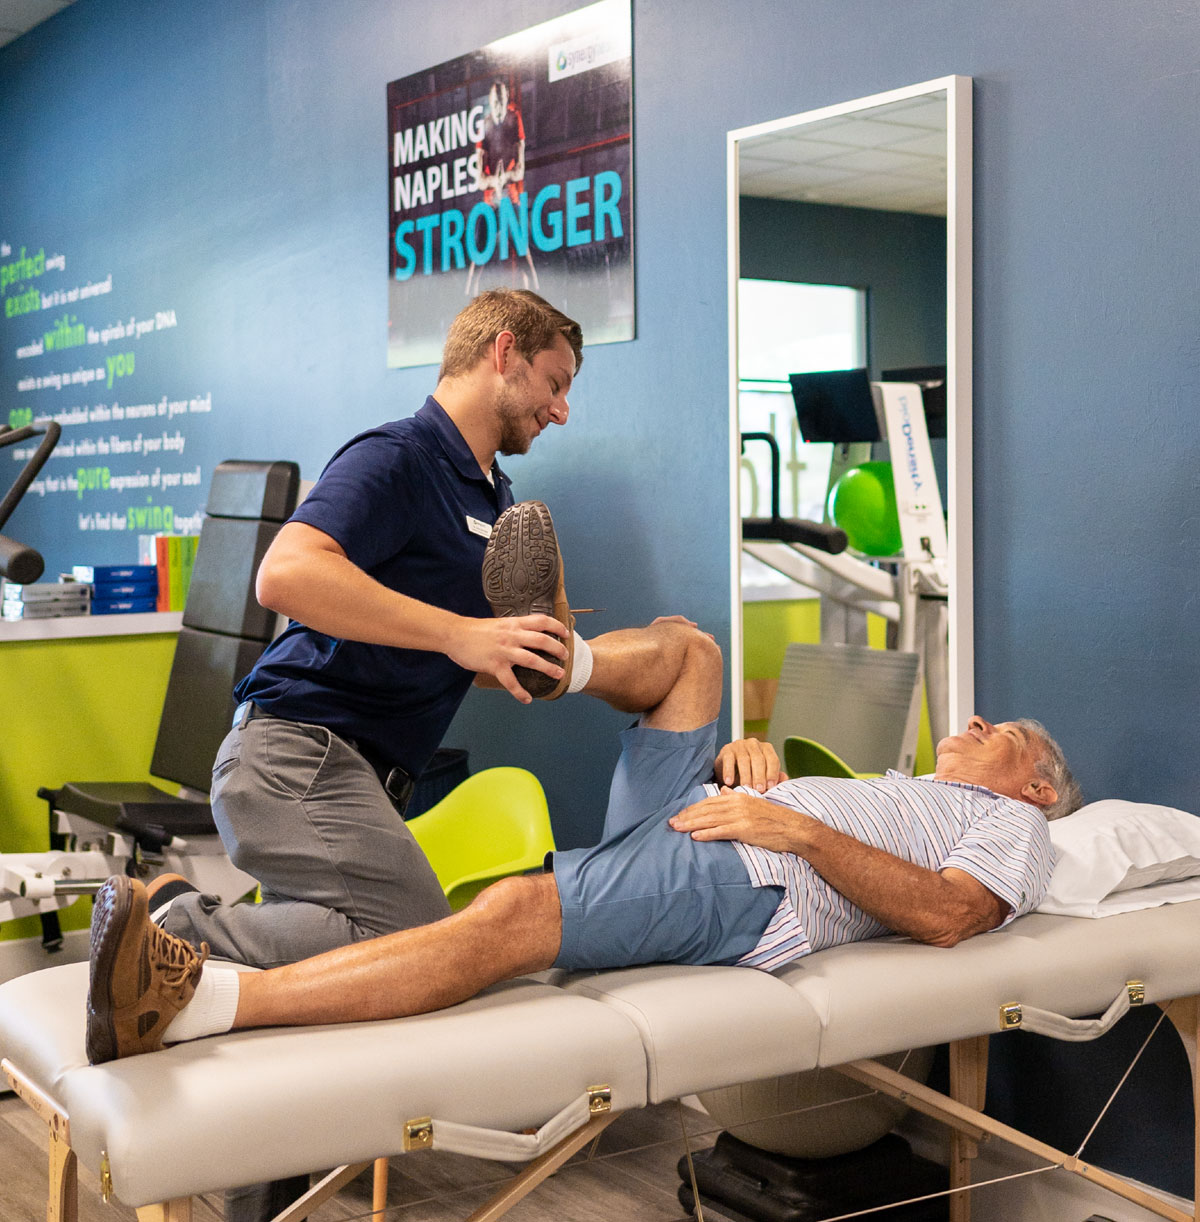 physical therapy services in naples fl